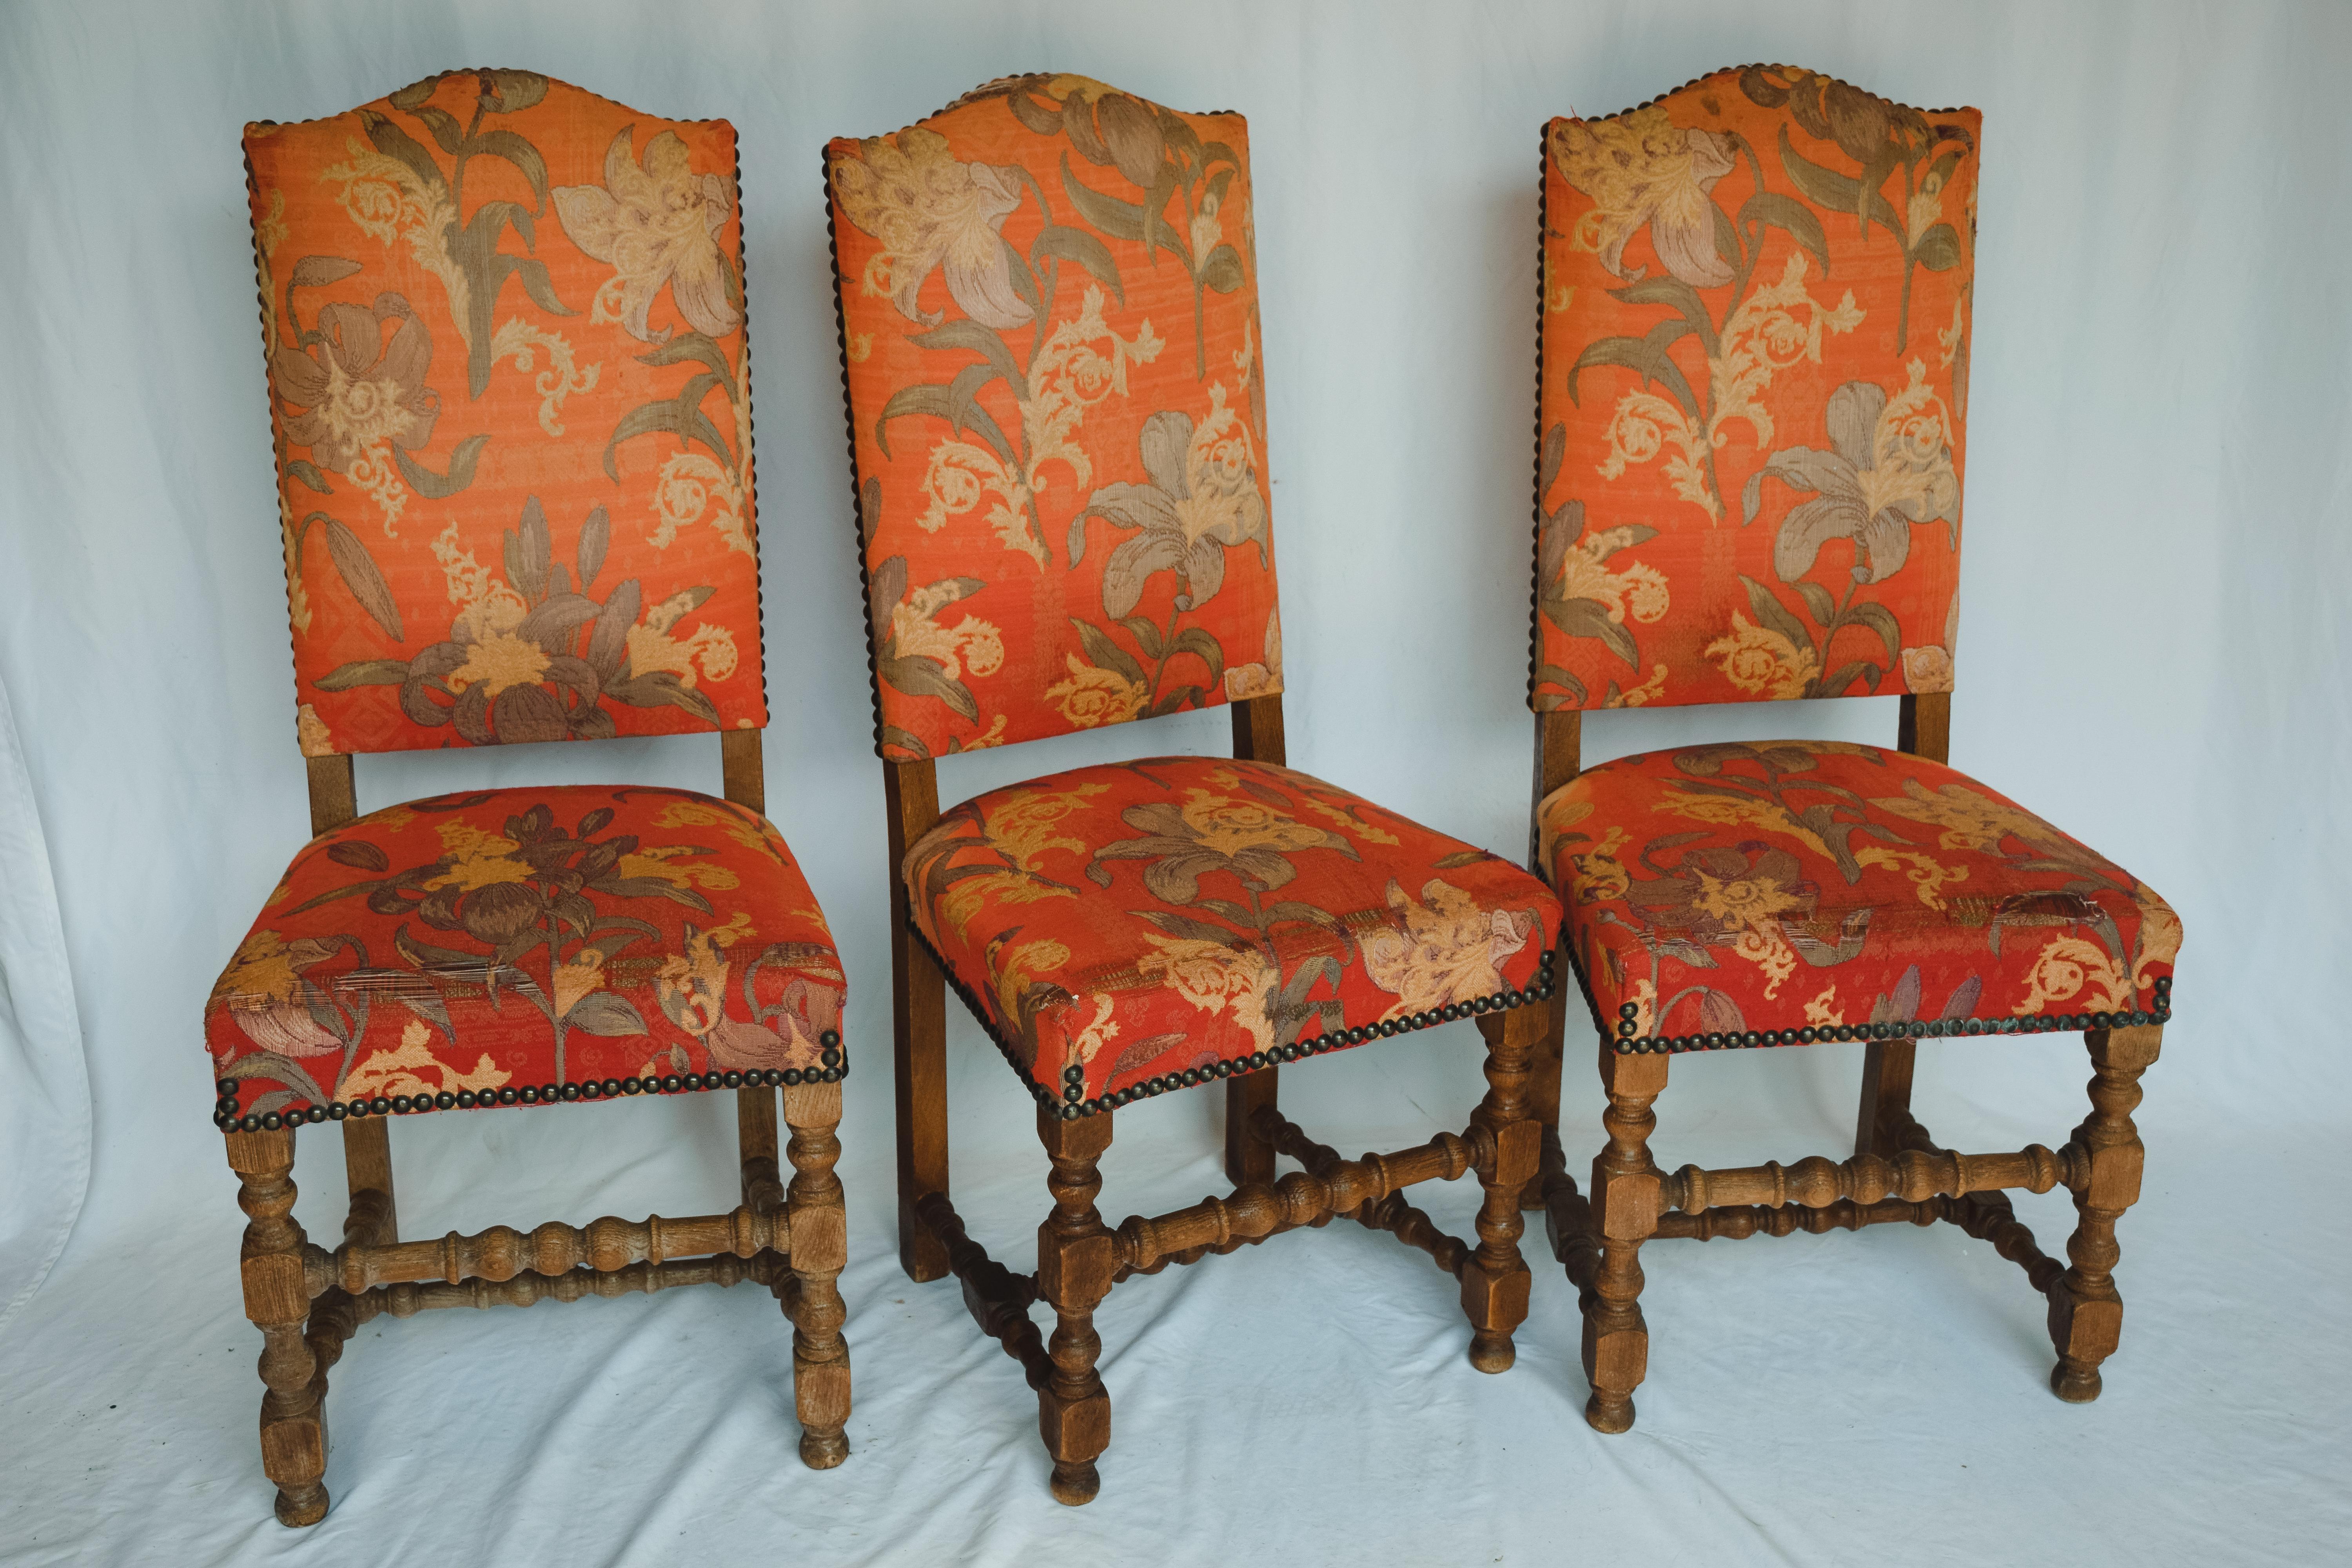 Authentic French country look. These Classic side chairs are upholstered with their original red floral motif upholstery, further embellished with decorative brass nail heads around the frame. The traditional dining chairs are in excellent condition